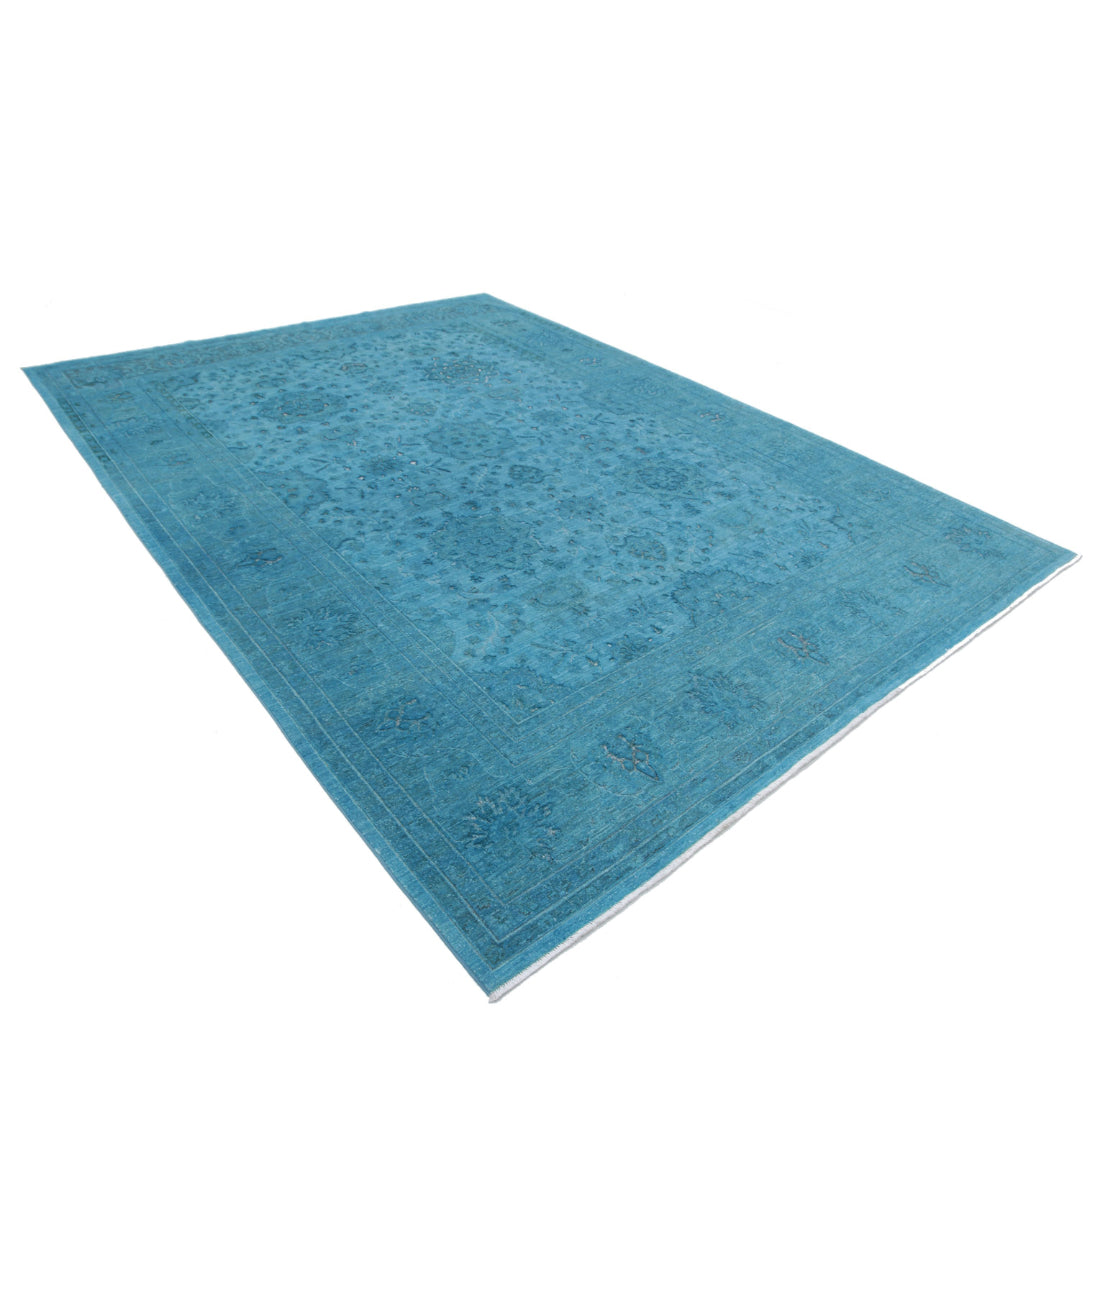 Hand Knotted Onyx Wool Rug - 8'9'' x 12'1'' 8'9'' x 12'1'' (263 X 363) / Teal / Teal